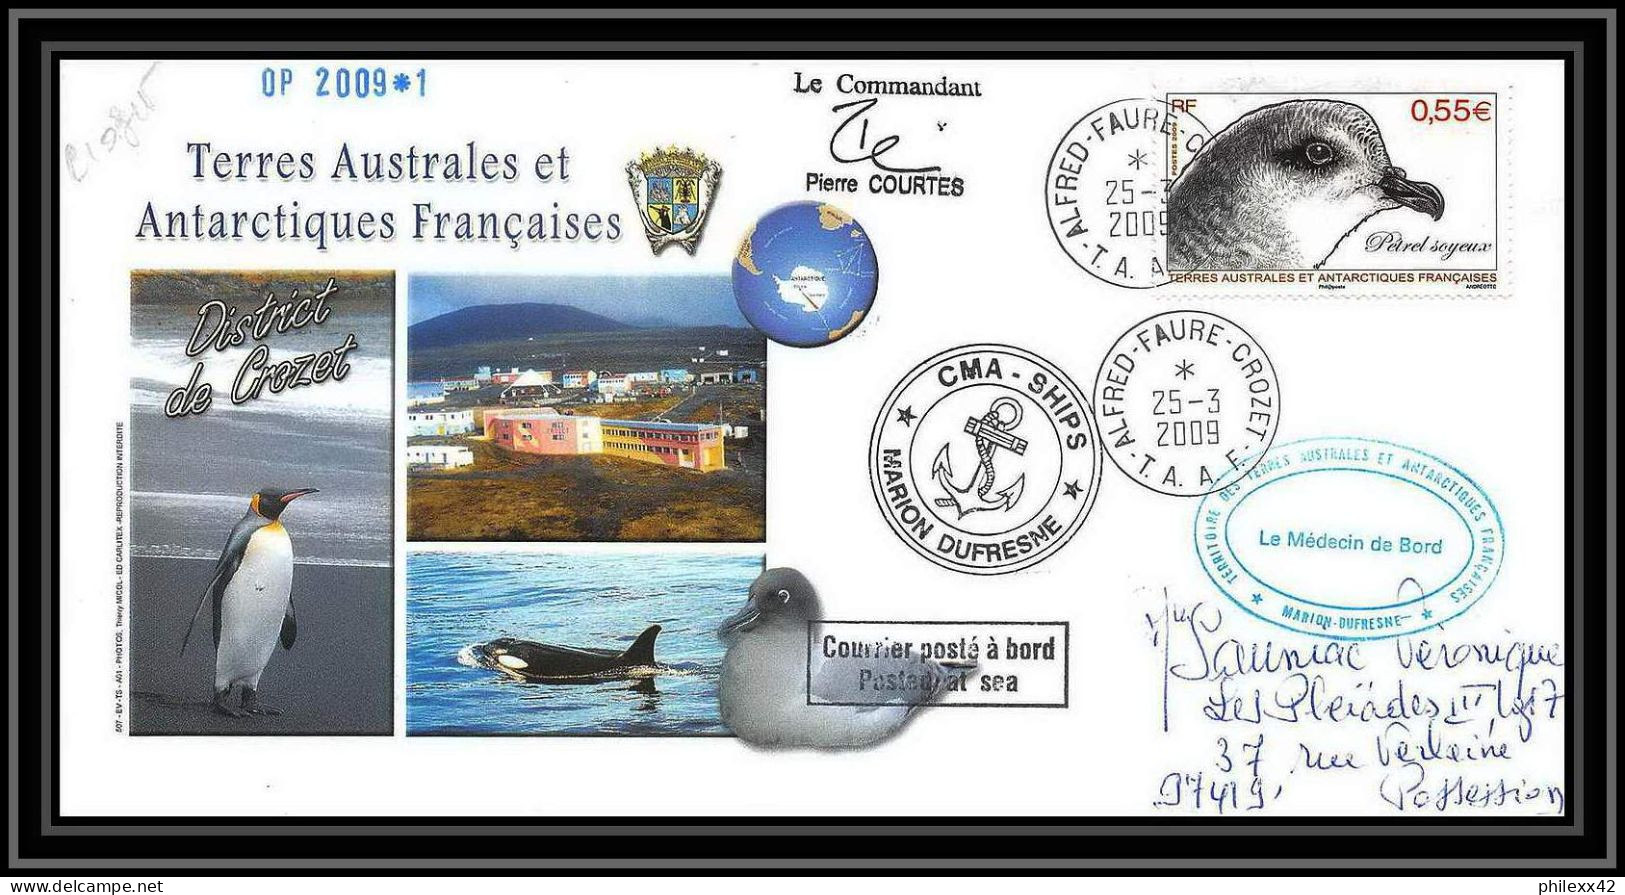 2891 Helilagon Dufresne Signé Signed OP 2009/1 Crozet 25/3/2009 N°534 ANTARCTIC Terres Australes (taaf) Lettre Cover - Hélicoptères